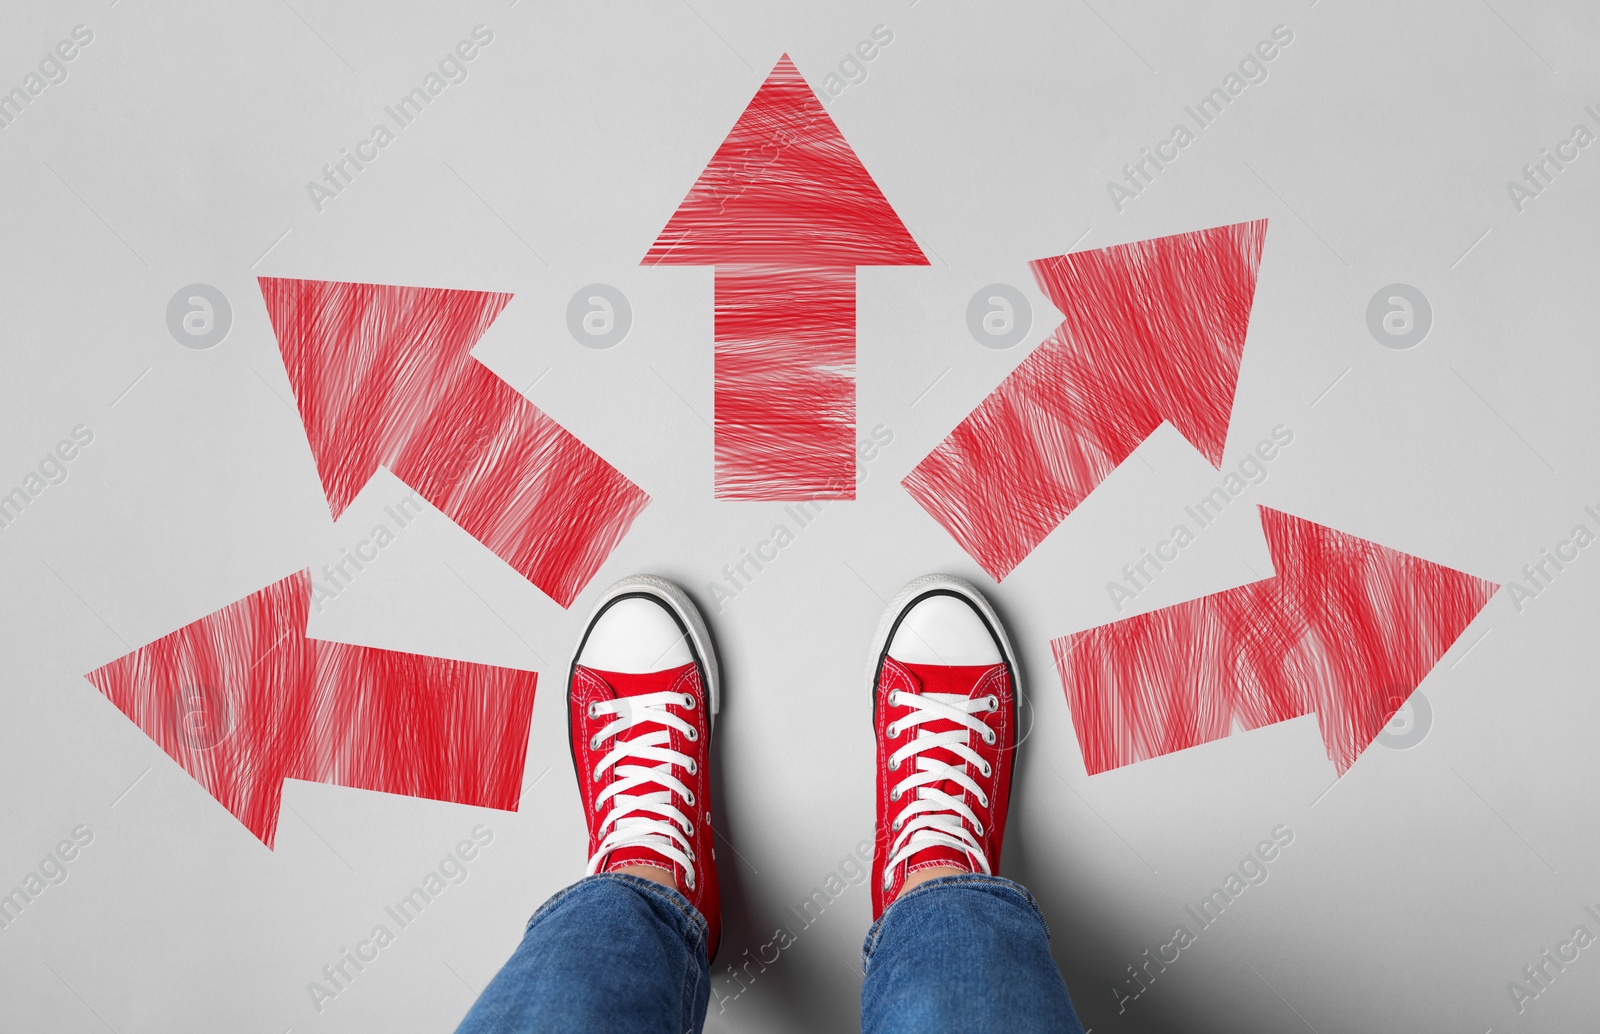 Image of Choosing future profession. Girl standing in front of drawn signs on grey background, top view. Arrows pointing in different directions symbolizing diversity of opportunities